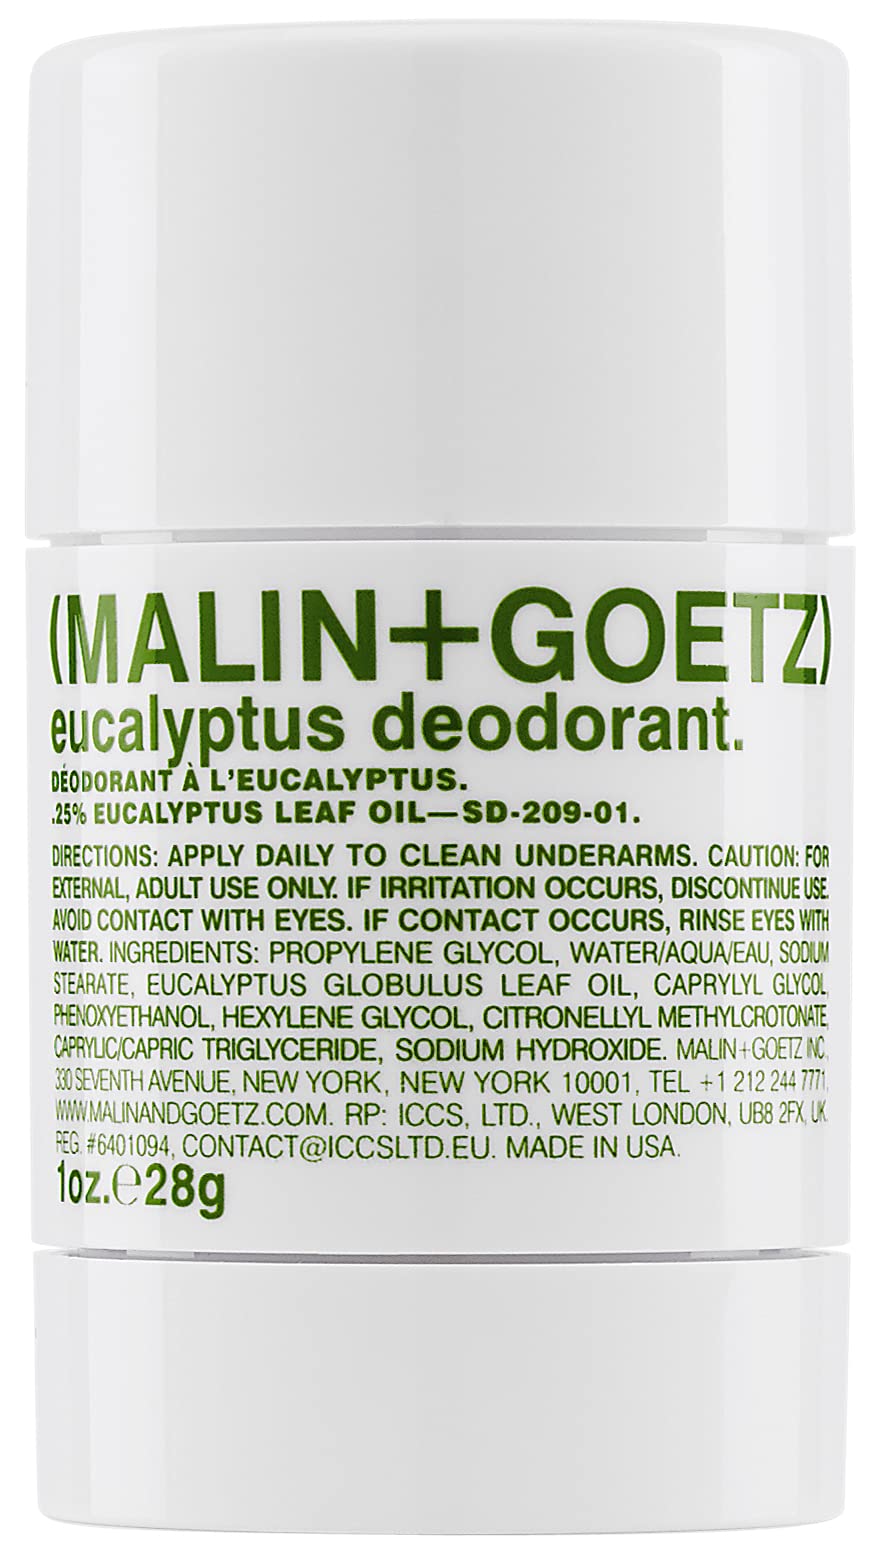 Malin + Goetz Travel Mini Eucalyptus Deodorant, natural effective odor & sweat defense, for all skin types, clear color, no residue/stains, free of aluminum, alcohol, baking soda, parabens 1oz